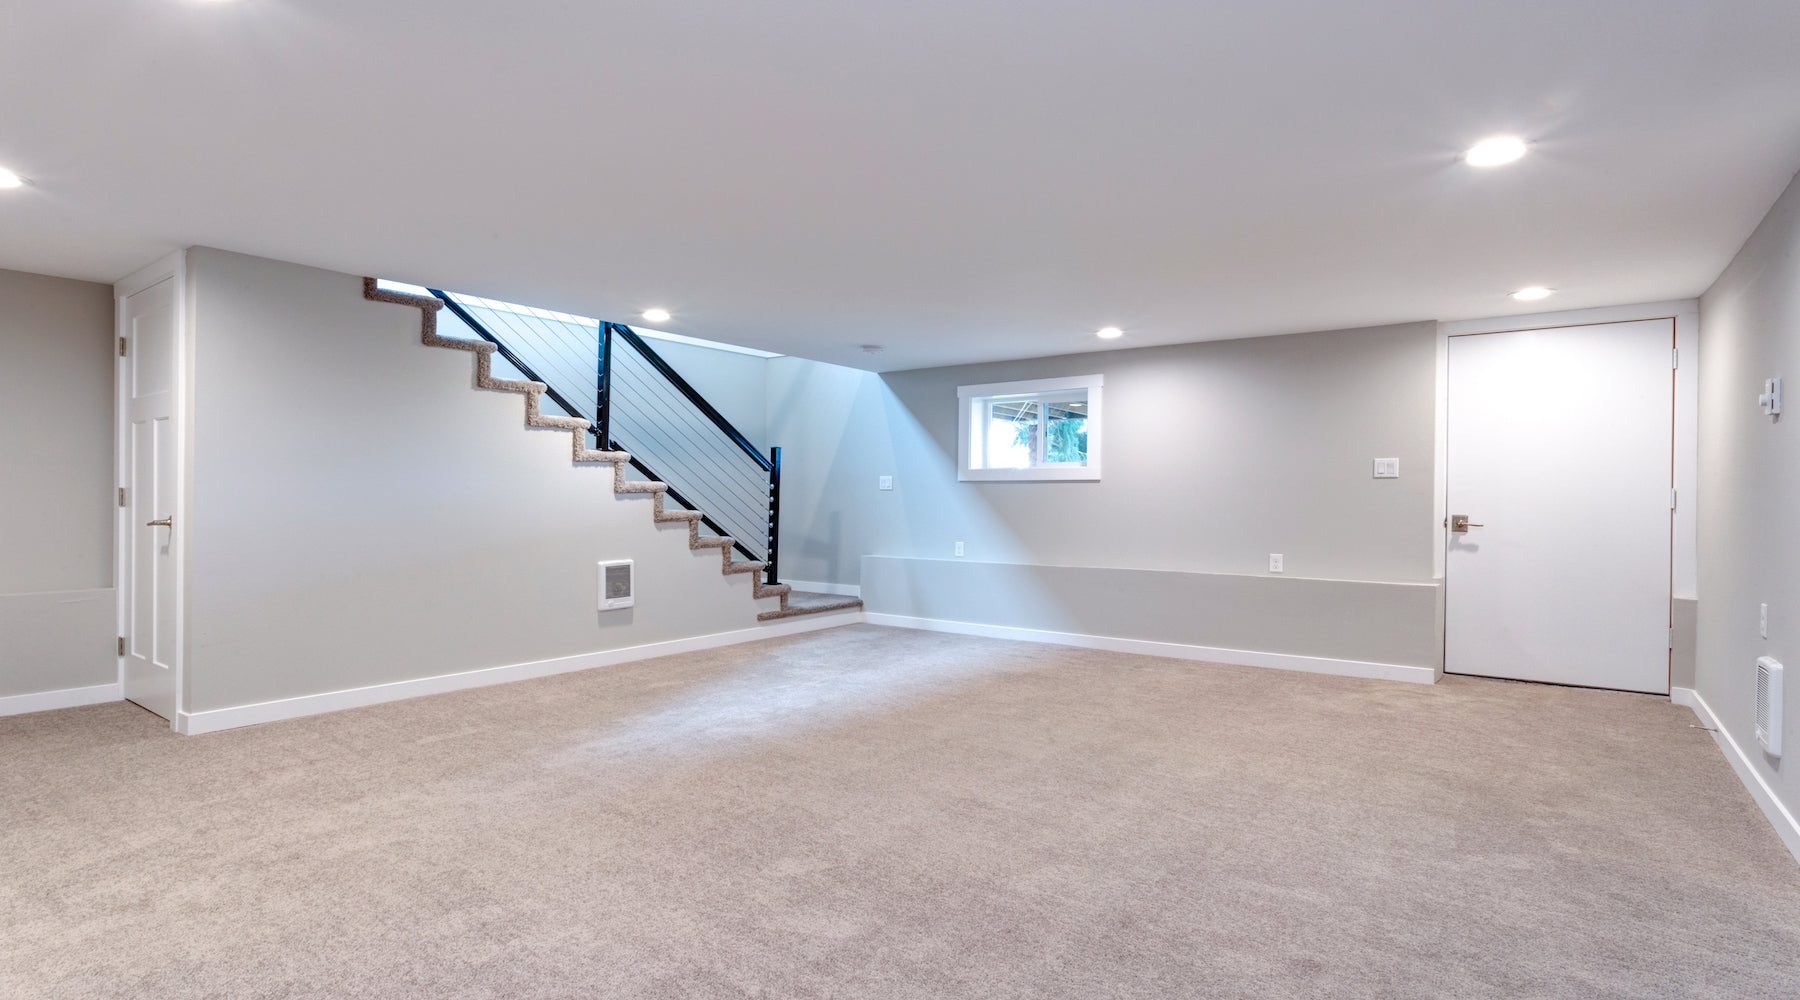 Basement lighting installed in large spacious basement with staircase